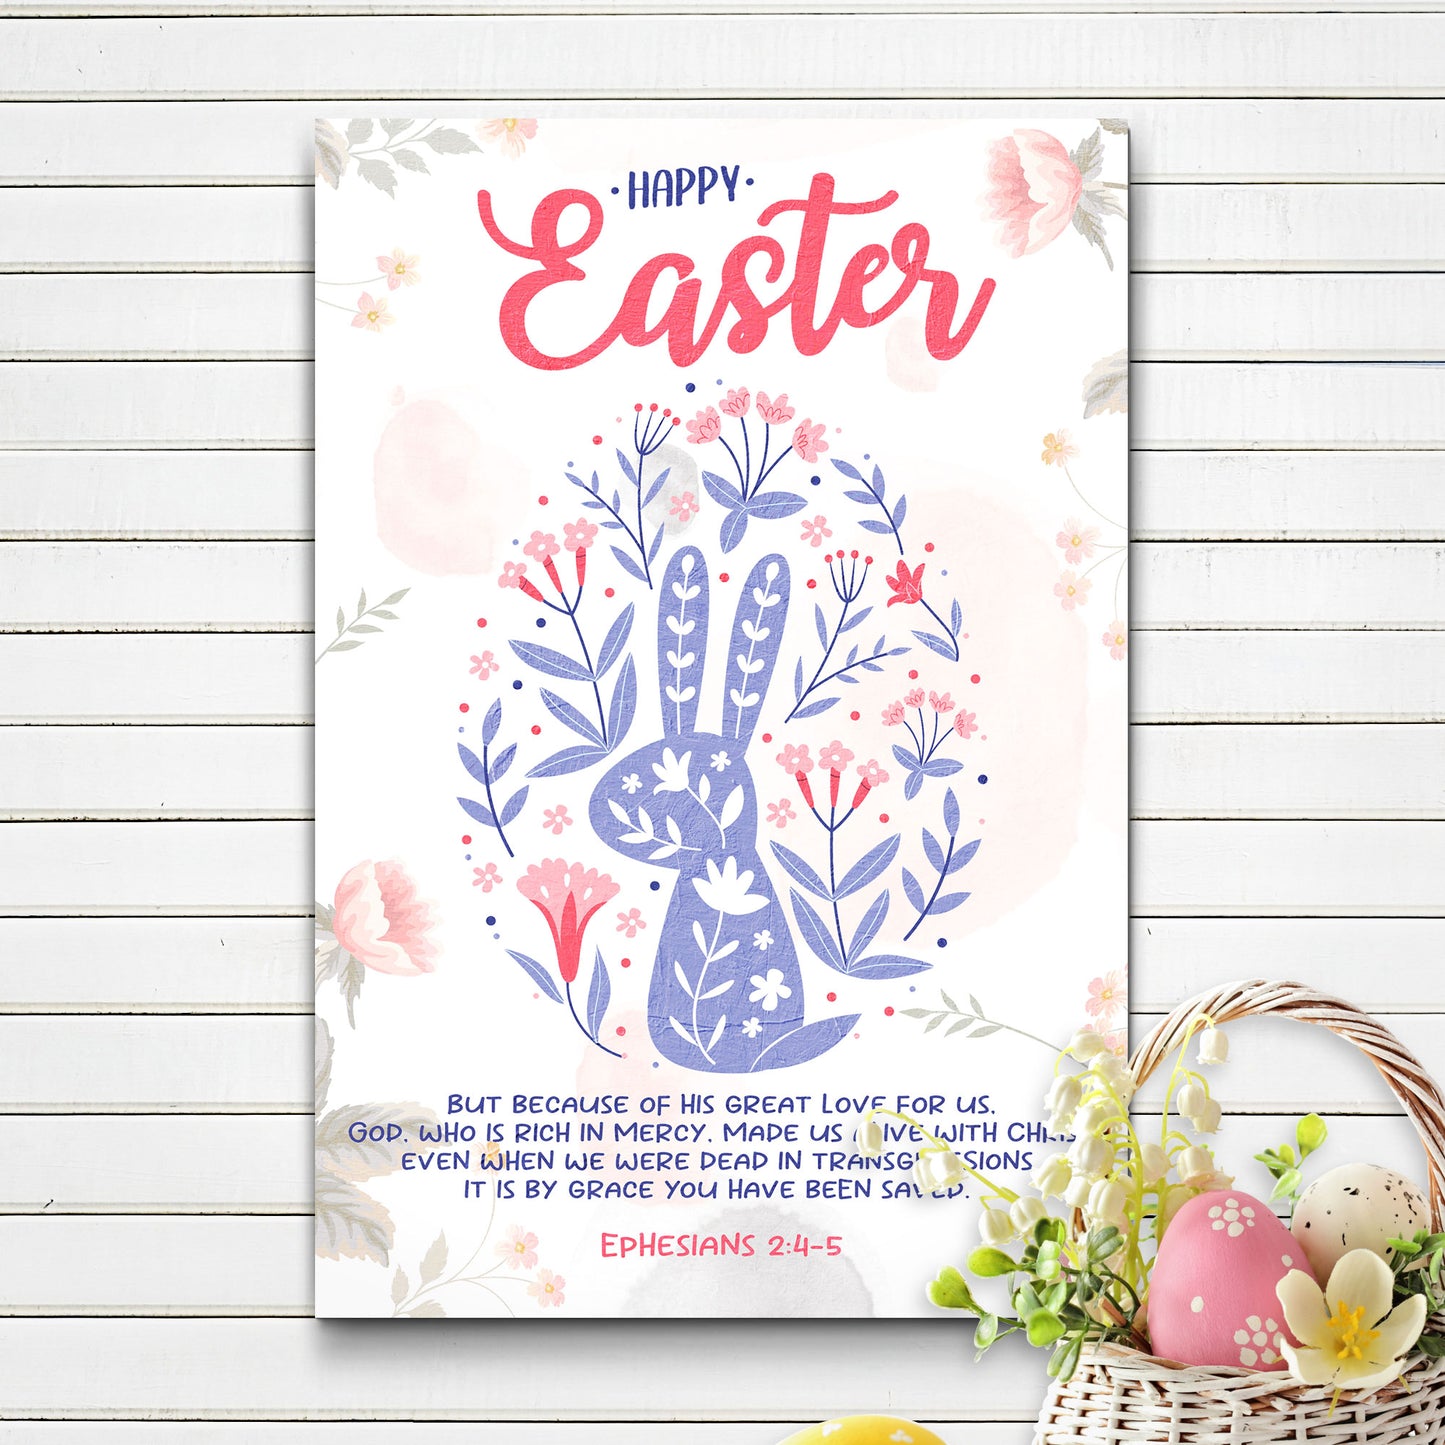 Ephesians 2:4-5 It Is By Grace You Have Been Saved. Happy Easter Sign Style 1 - Image by Tailored Canvases